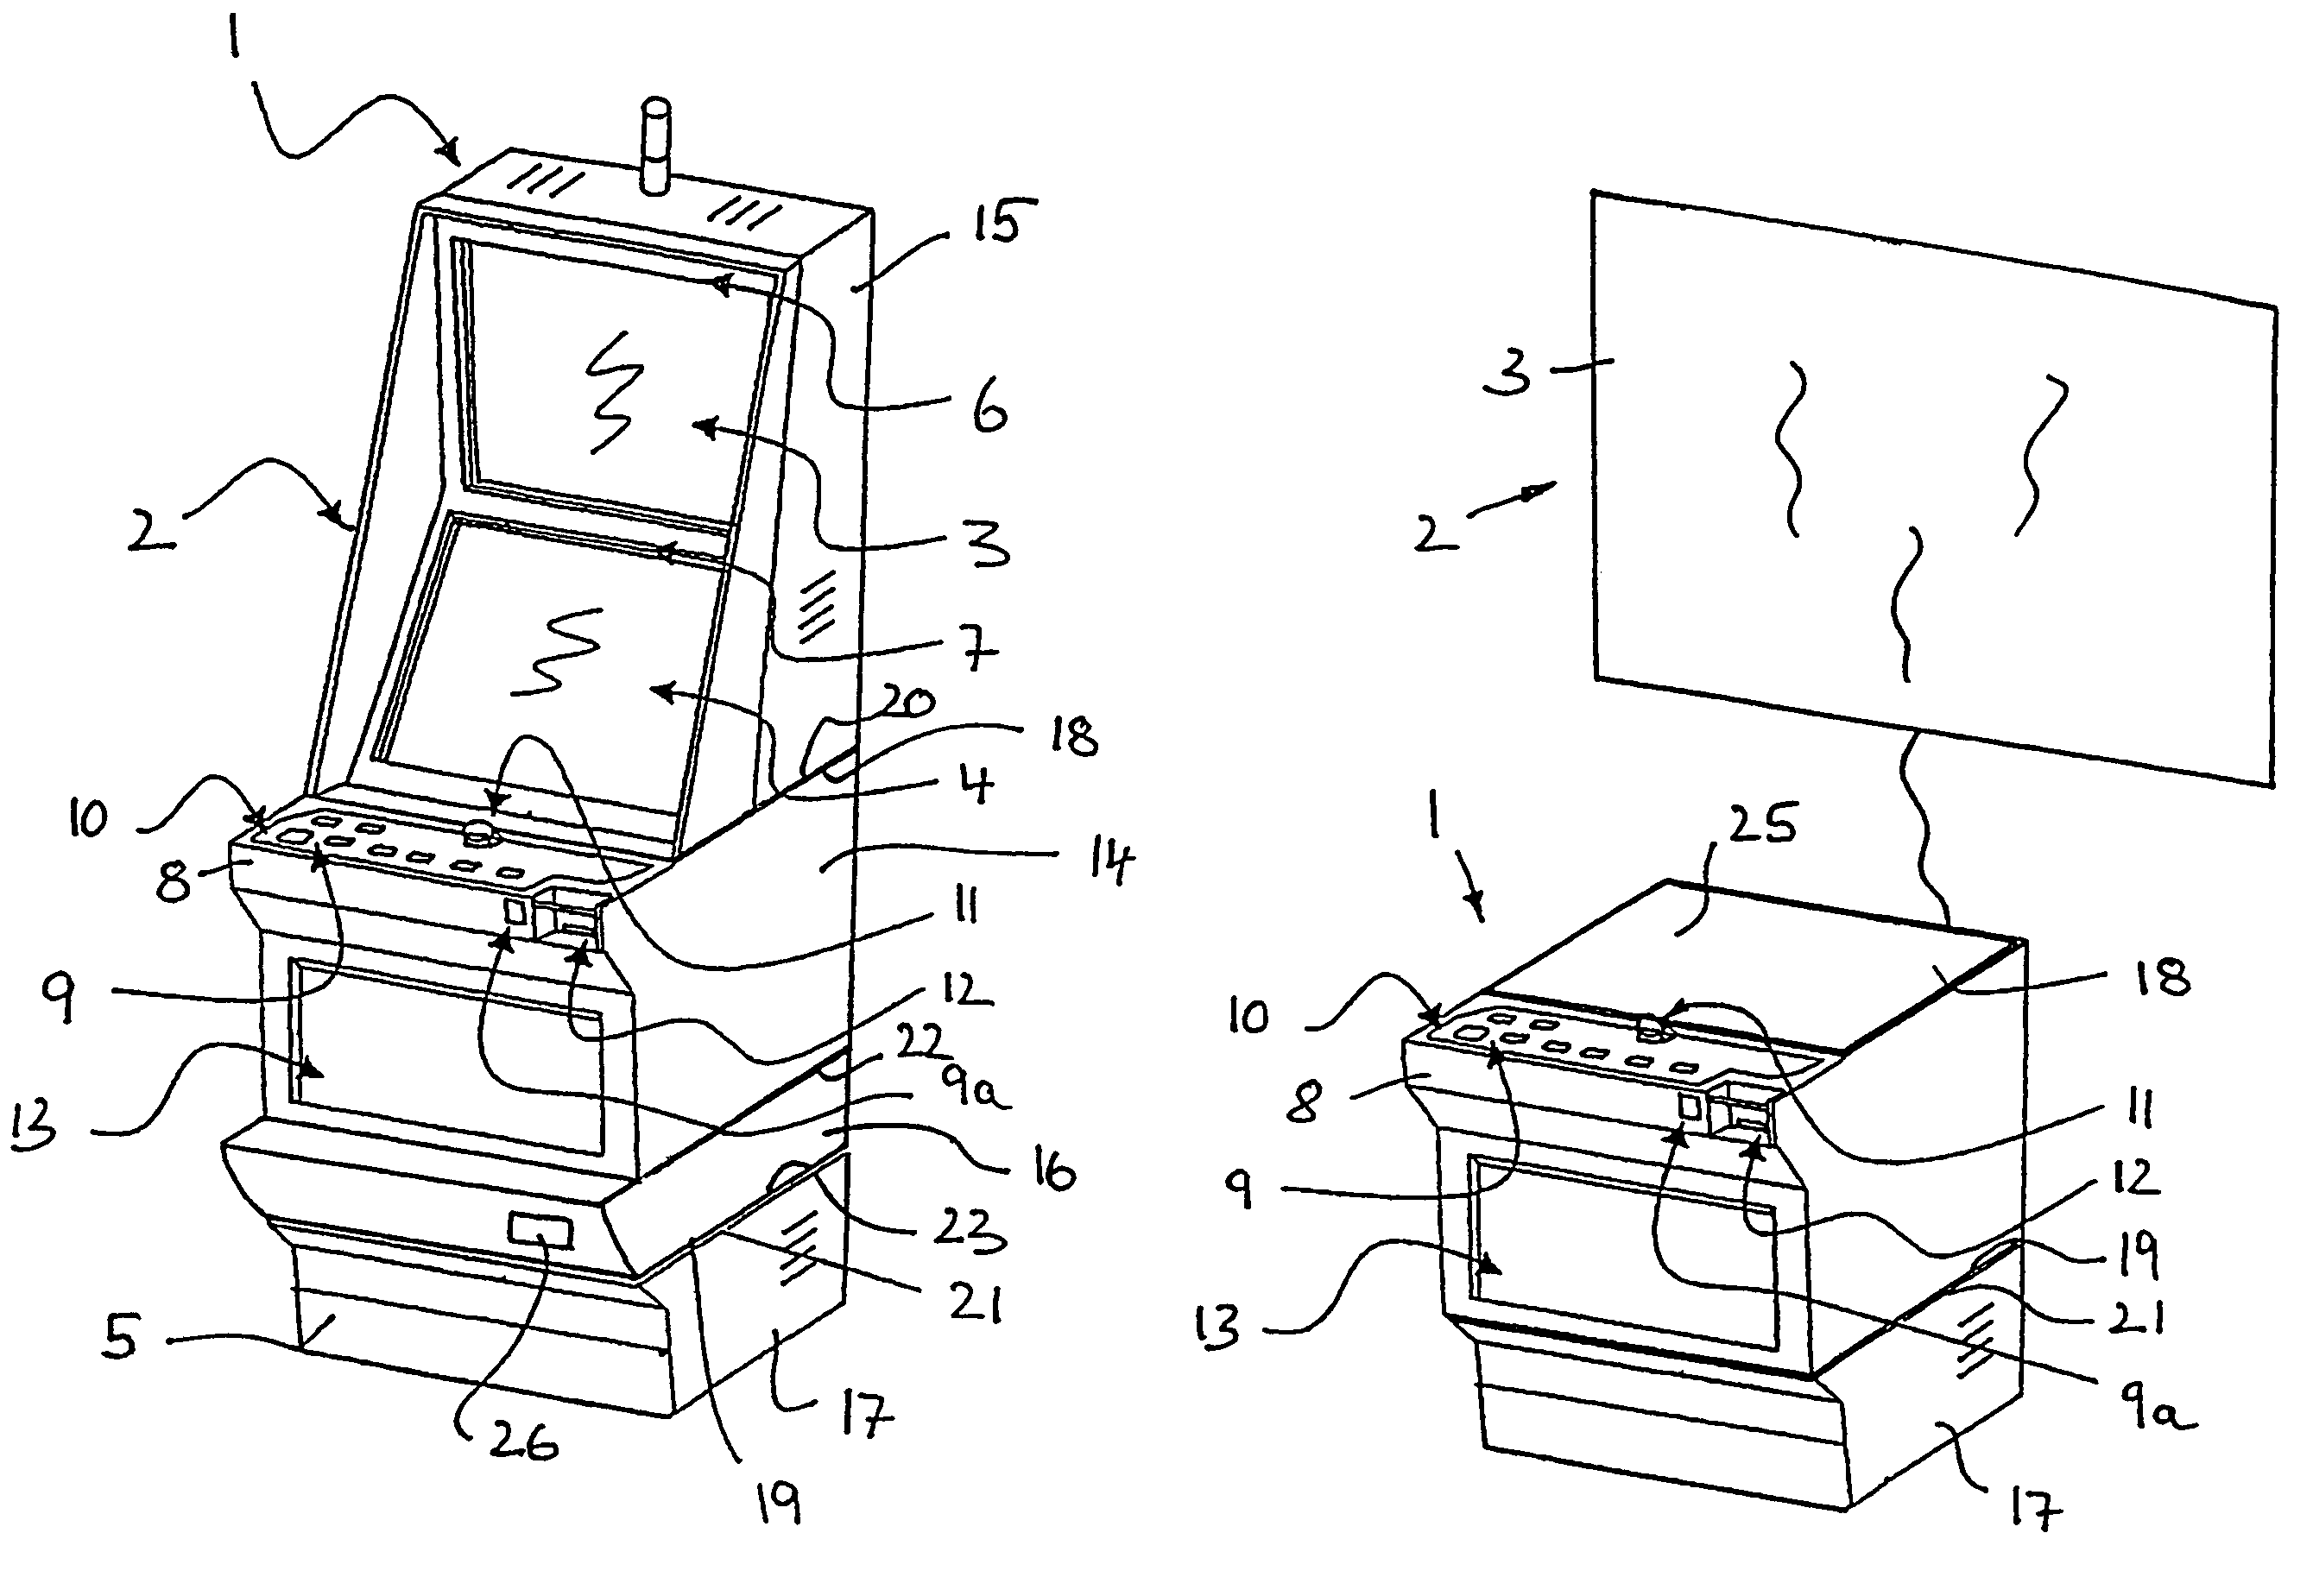 Gaming, gambling and/or entertainment device